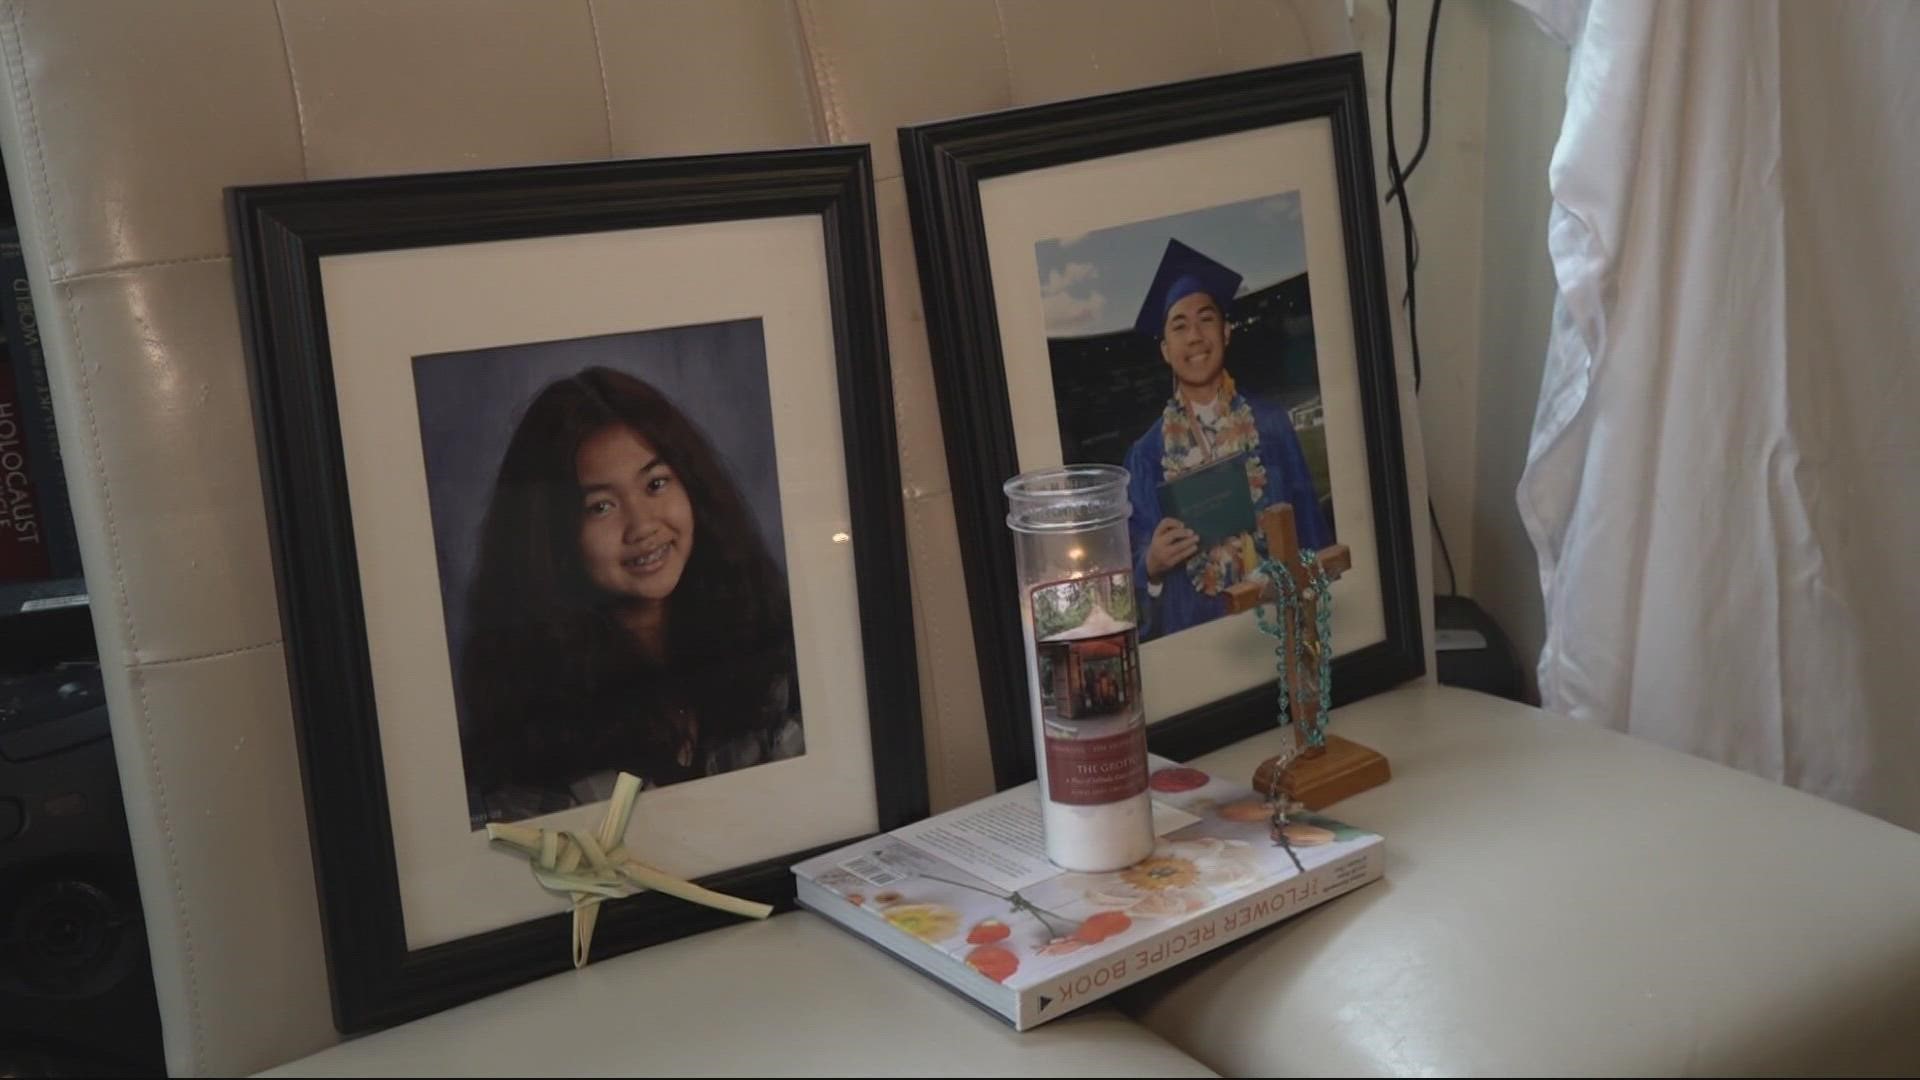 Two adults and two teenagers were killed when a car collided head-on with an RV on Highway 18 on April 10. KGW's Galen Ettlin spoke to the grieving family.